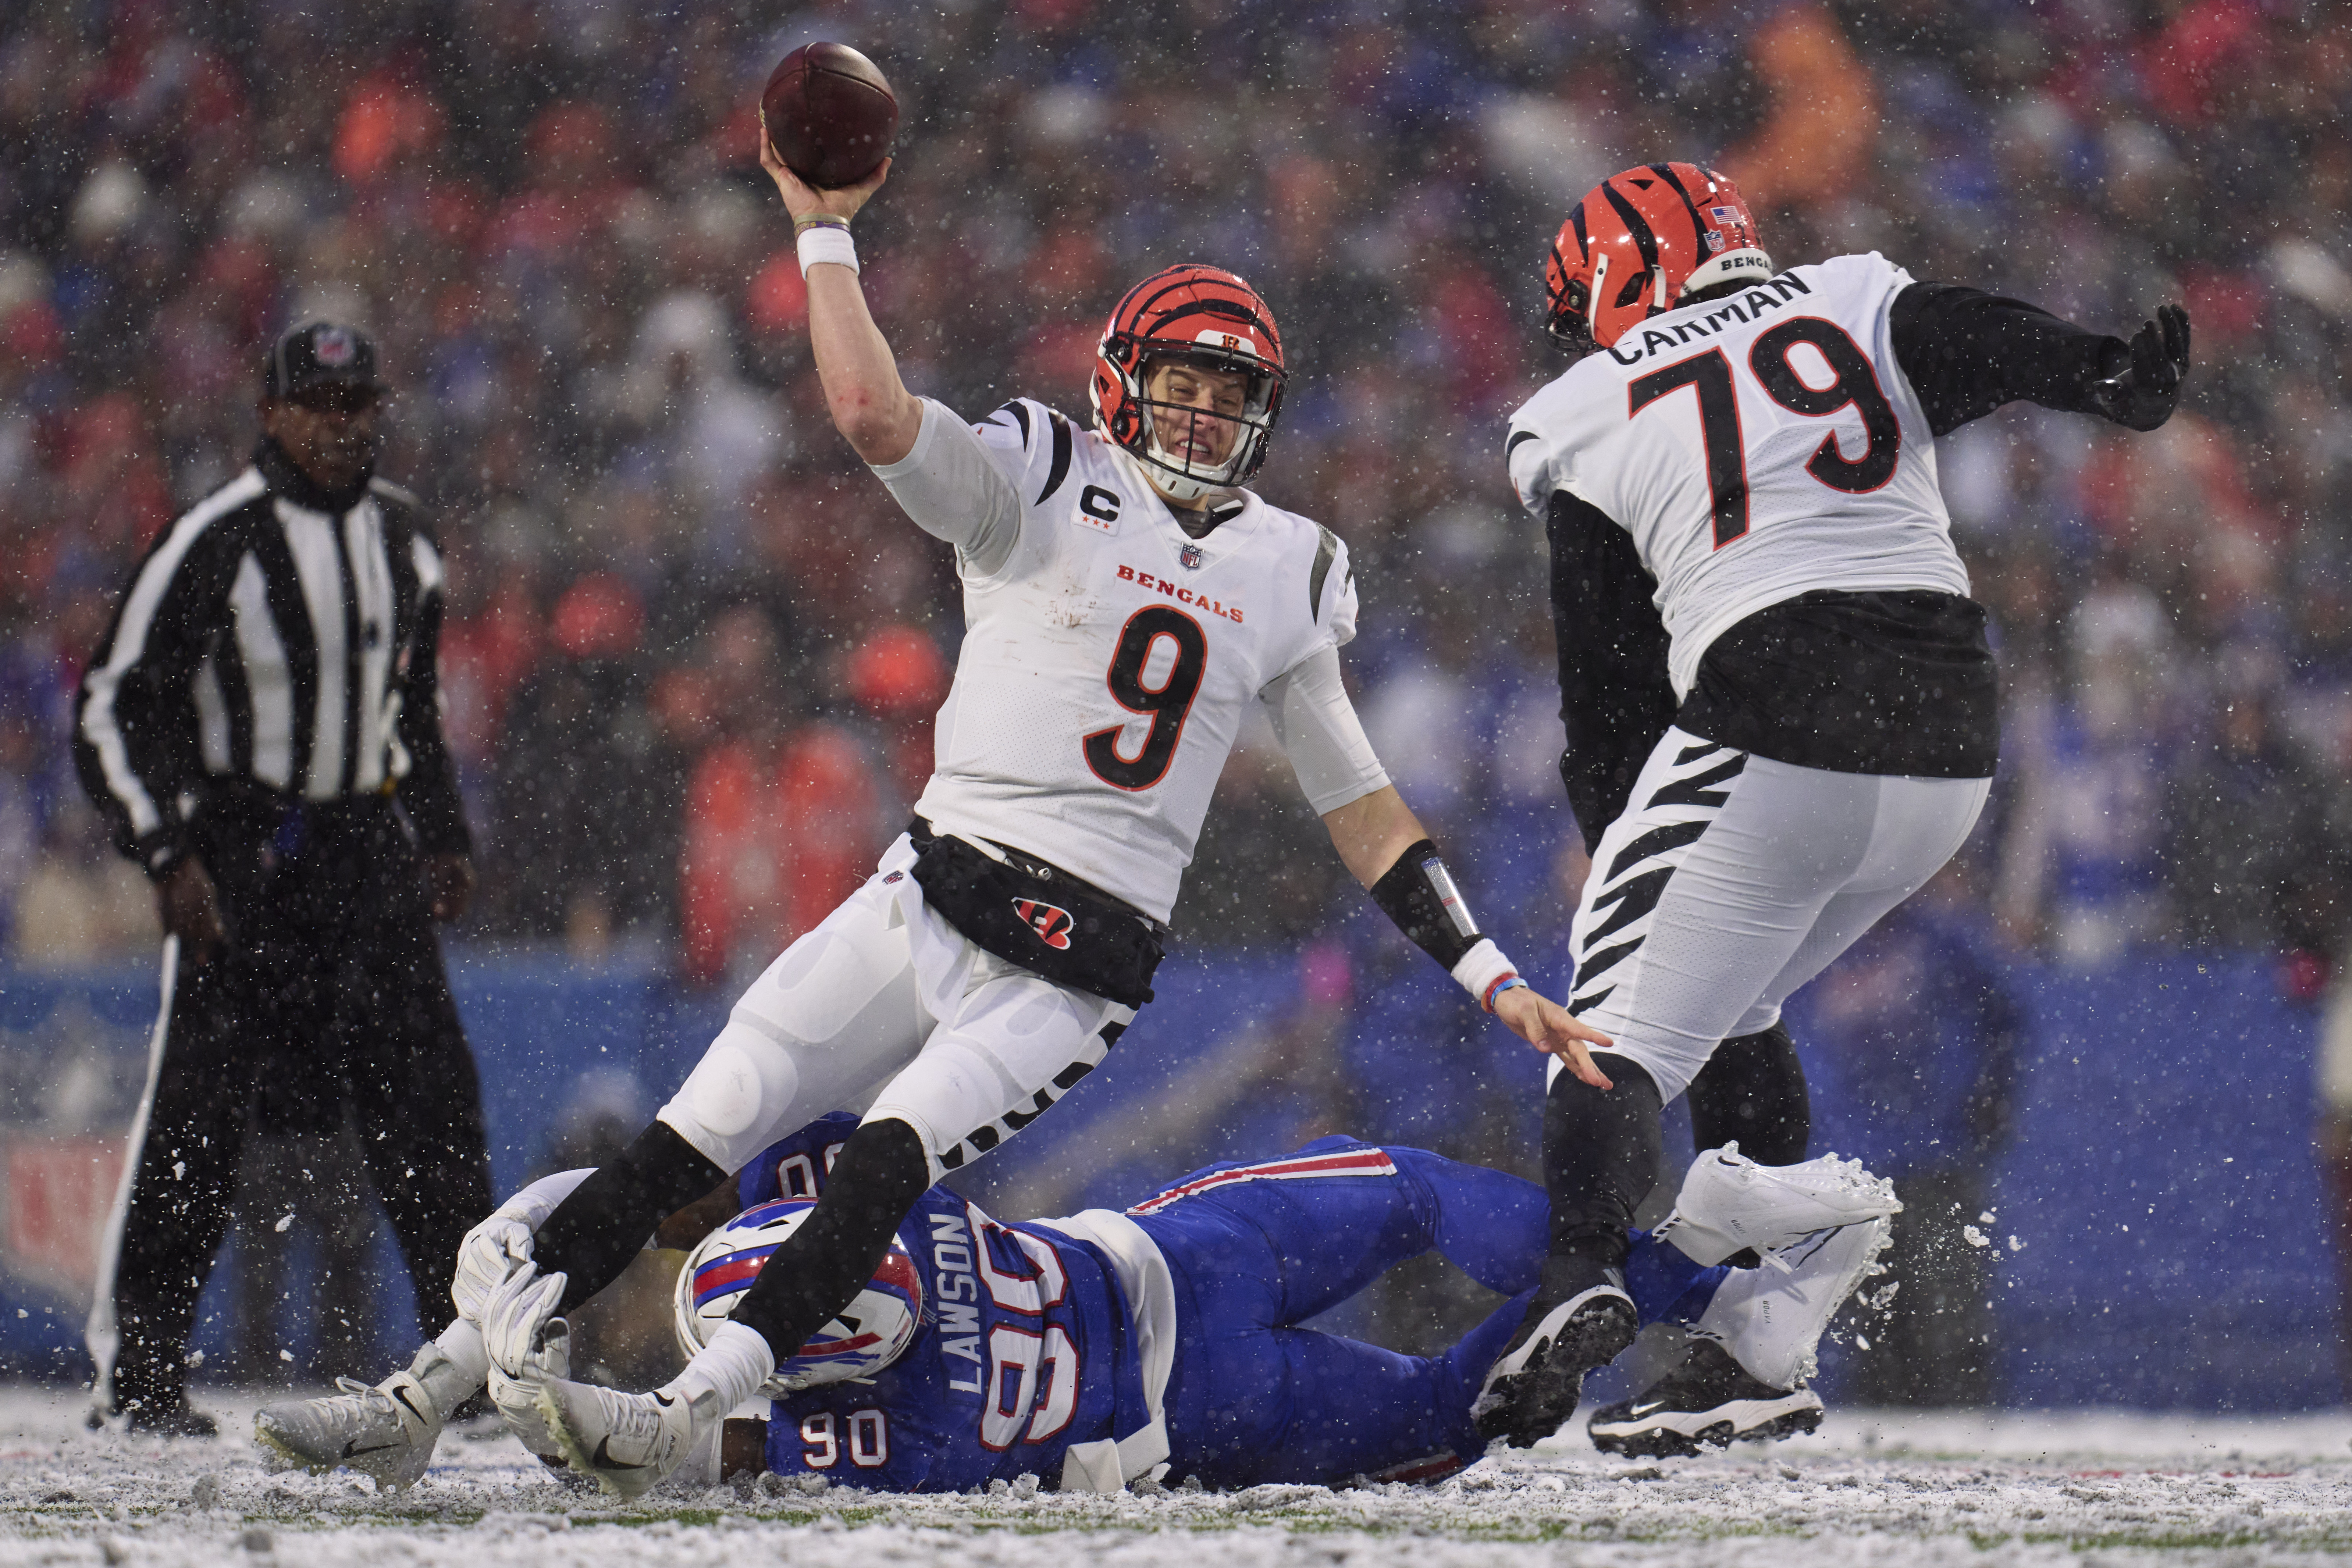 Quarterback Joe Burrow (#9) of the Cincinnati Bengals passes in the NFL American Football Conference Divisional Round game against the Buffalo Bills at Highmark Stadium in Orchard, New York, January 22, 2023. /CFP